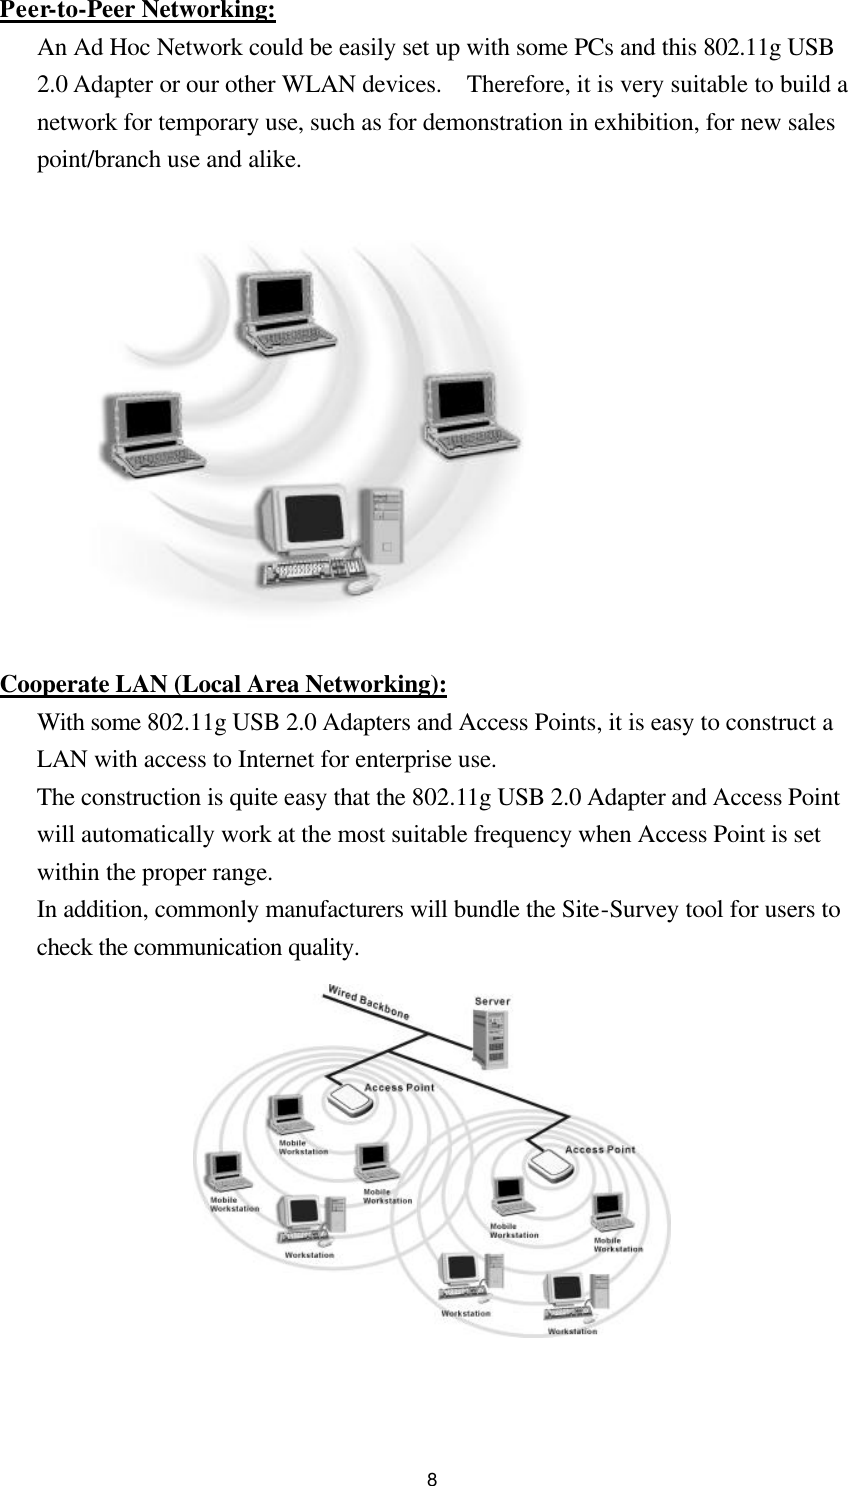  8Peer-to-Peer Networking: An Ad Hoc Network could be easily set up with some PCs and this 802.11g USB 2.0 Adapter or our other WLAN devices.  Therefore, it is very suitable to build a network for temporary use, such as for demonstration in exhibition, for new sales point/branch use and alike.              Cooperate LAN (Local Area Networking): With some 802.11g USB 2.0 Adapters and Access Points, it is easy to construct a LAN with access to Internet for enterprise use. The construction is quite easy that the 802.11g USB 2.0 Adapter and Access Point will automatically work at the most suitable frequency when Access Point is set within the proper range. In addition, commonly manufacturers will bundle the Site-Survey tool for users to check the communication quality.             